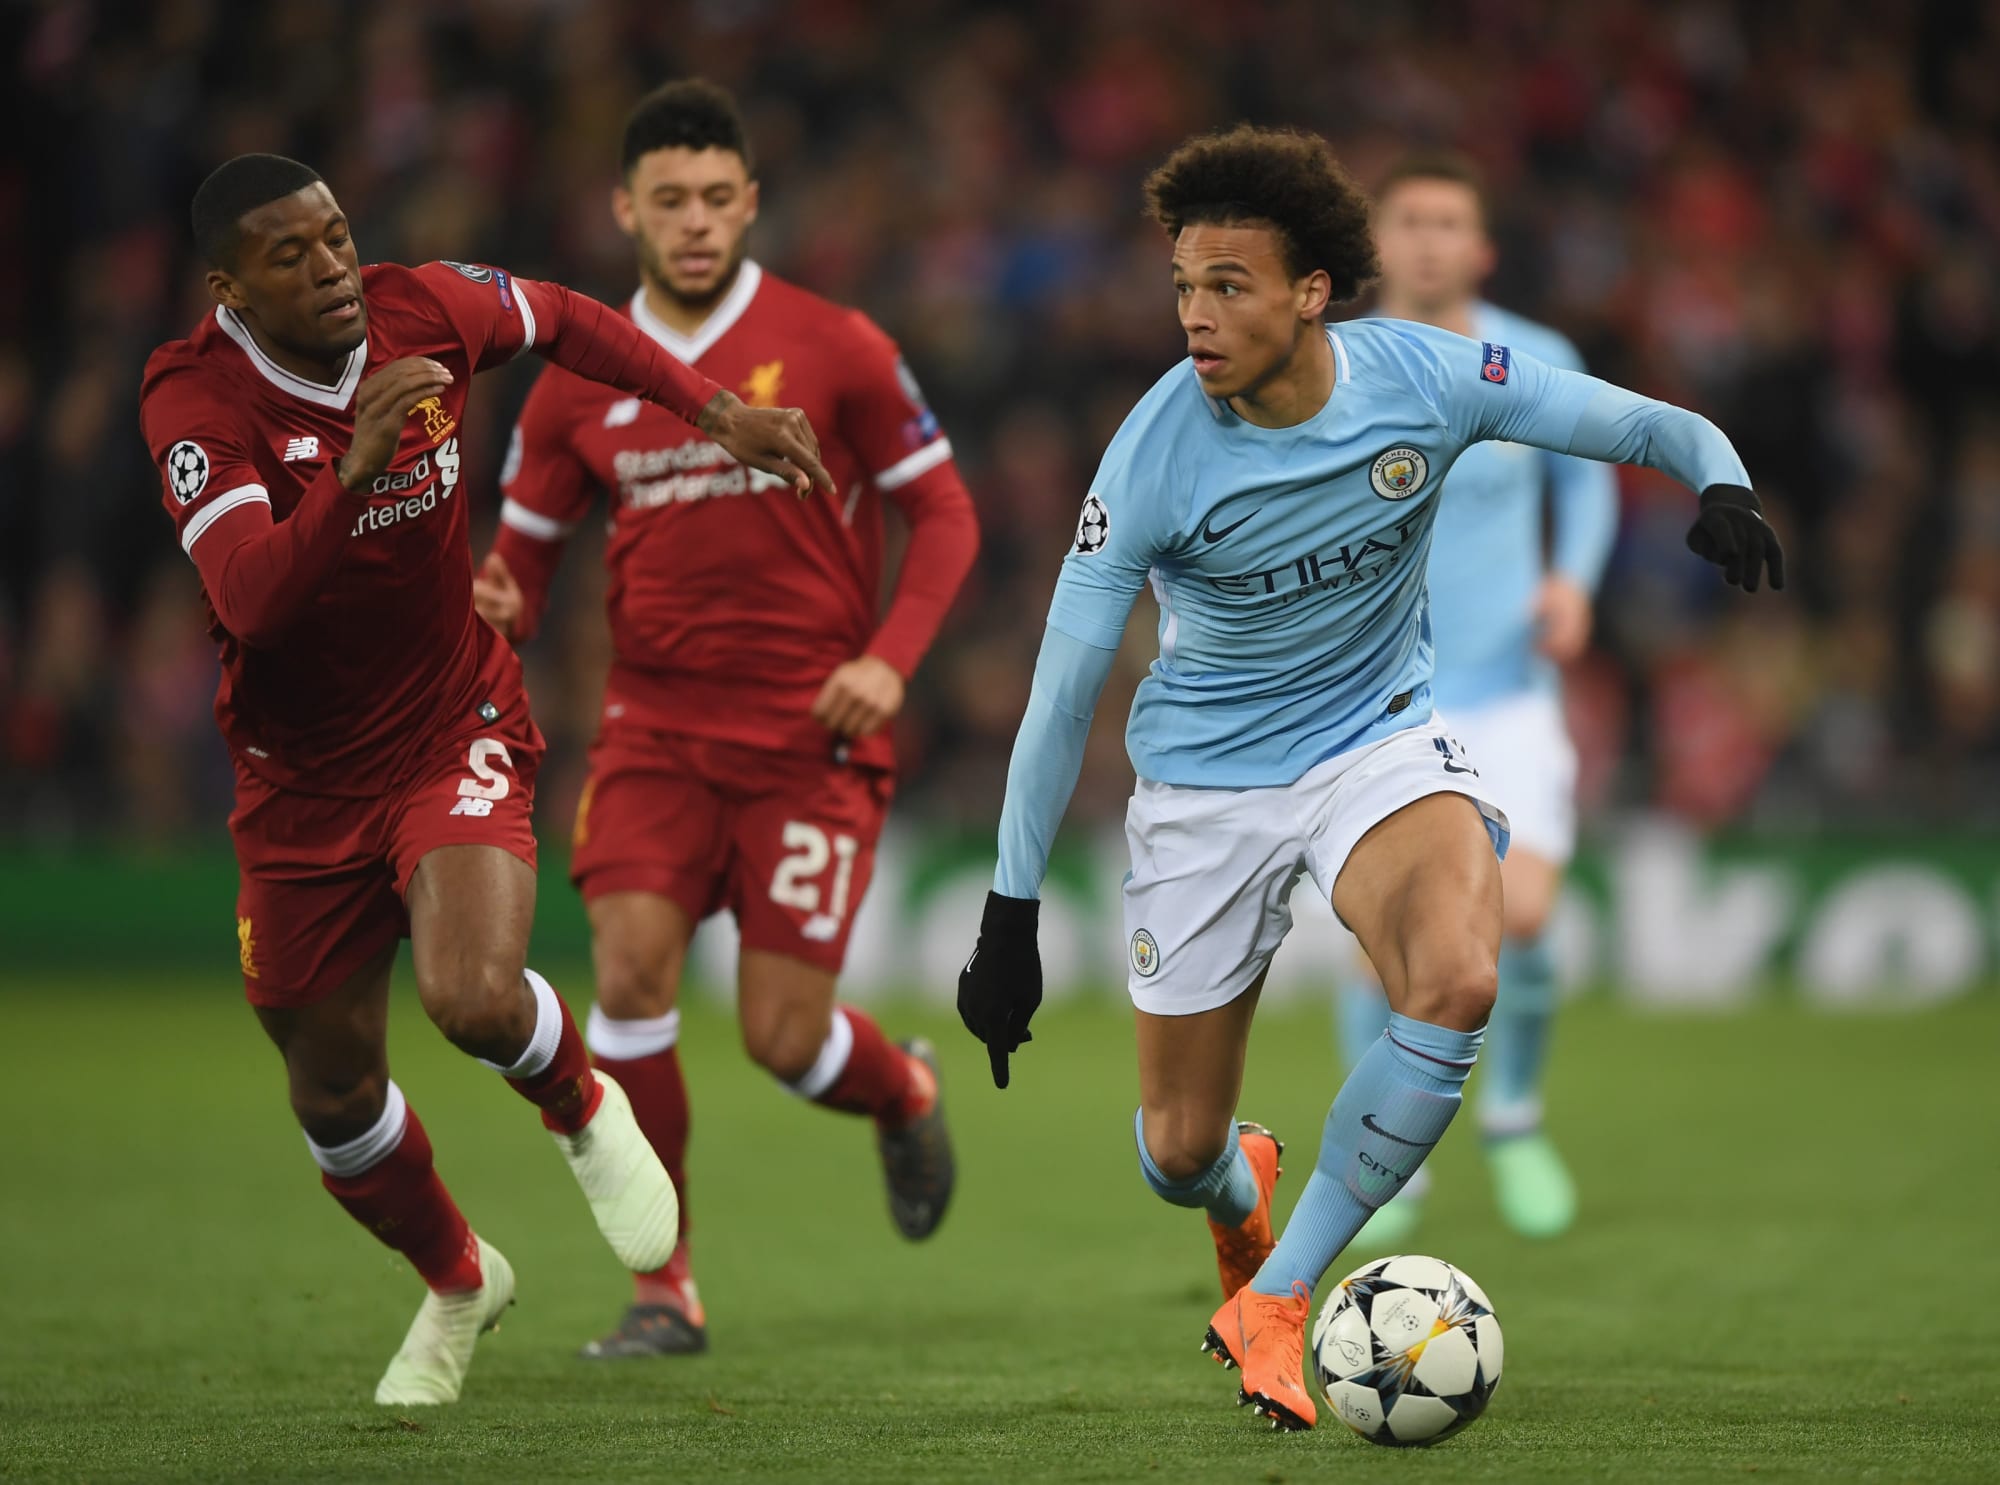 Manchester City vs. Liverpool live stream: Watch Champions League online